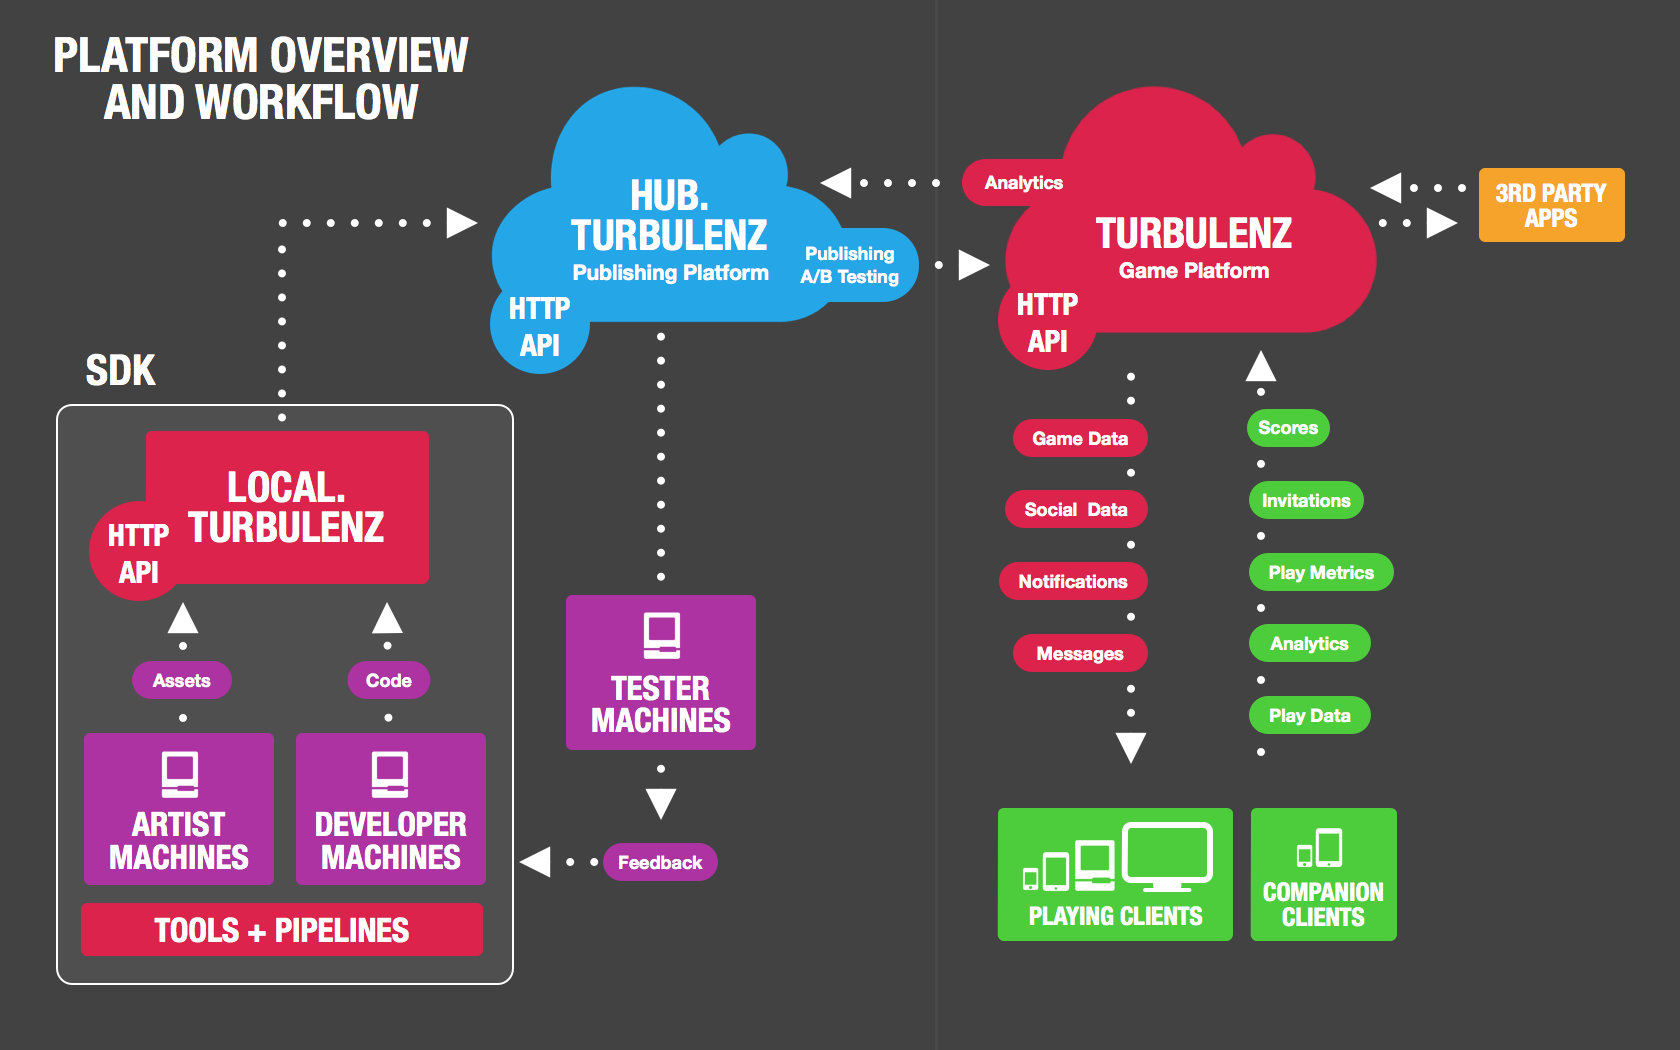 Turbulenz HTML5 game engine is now open source